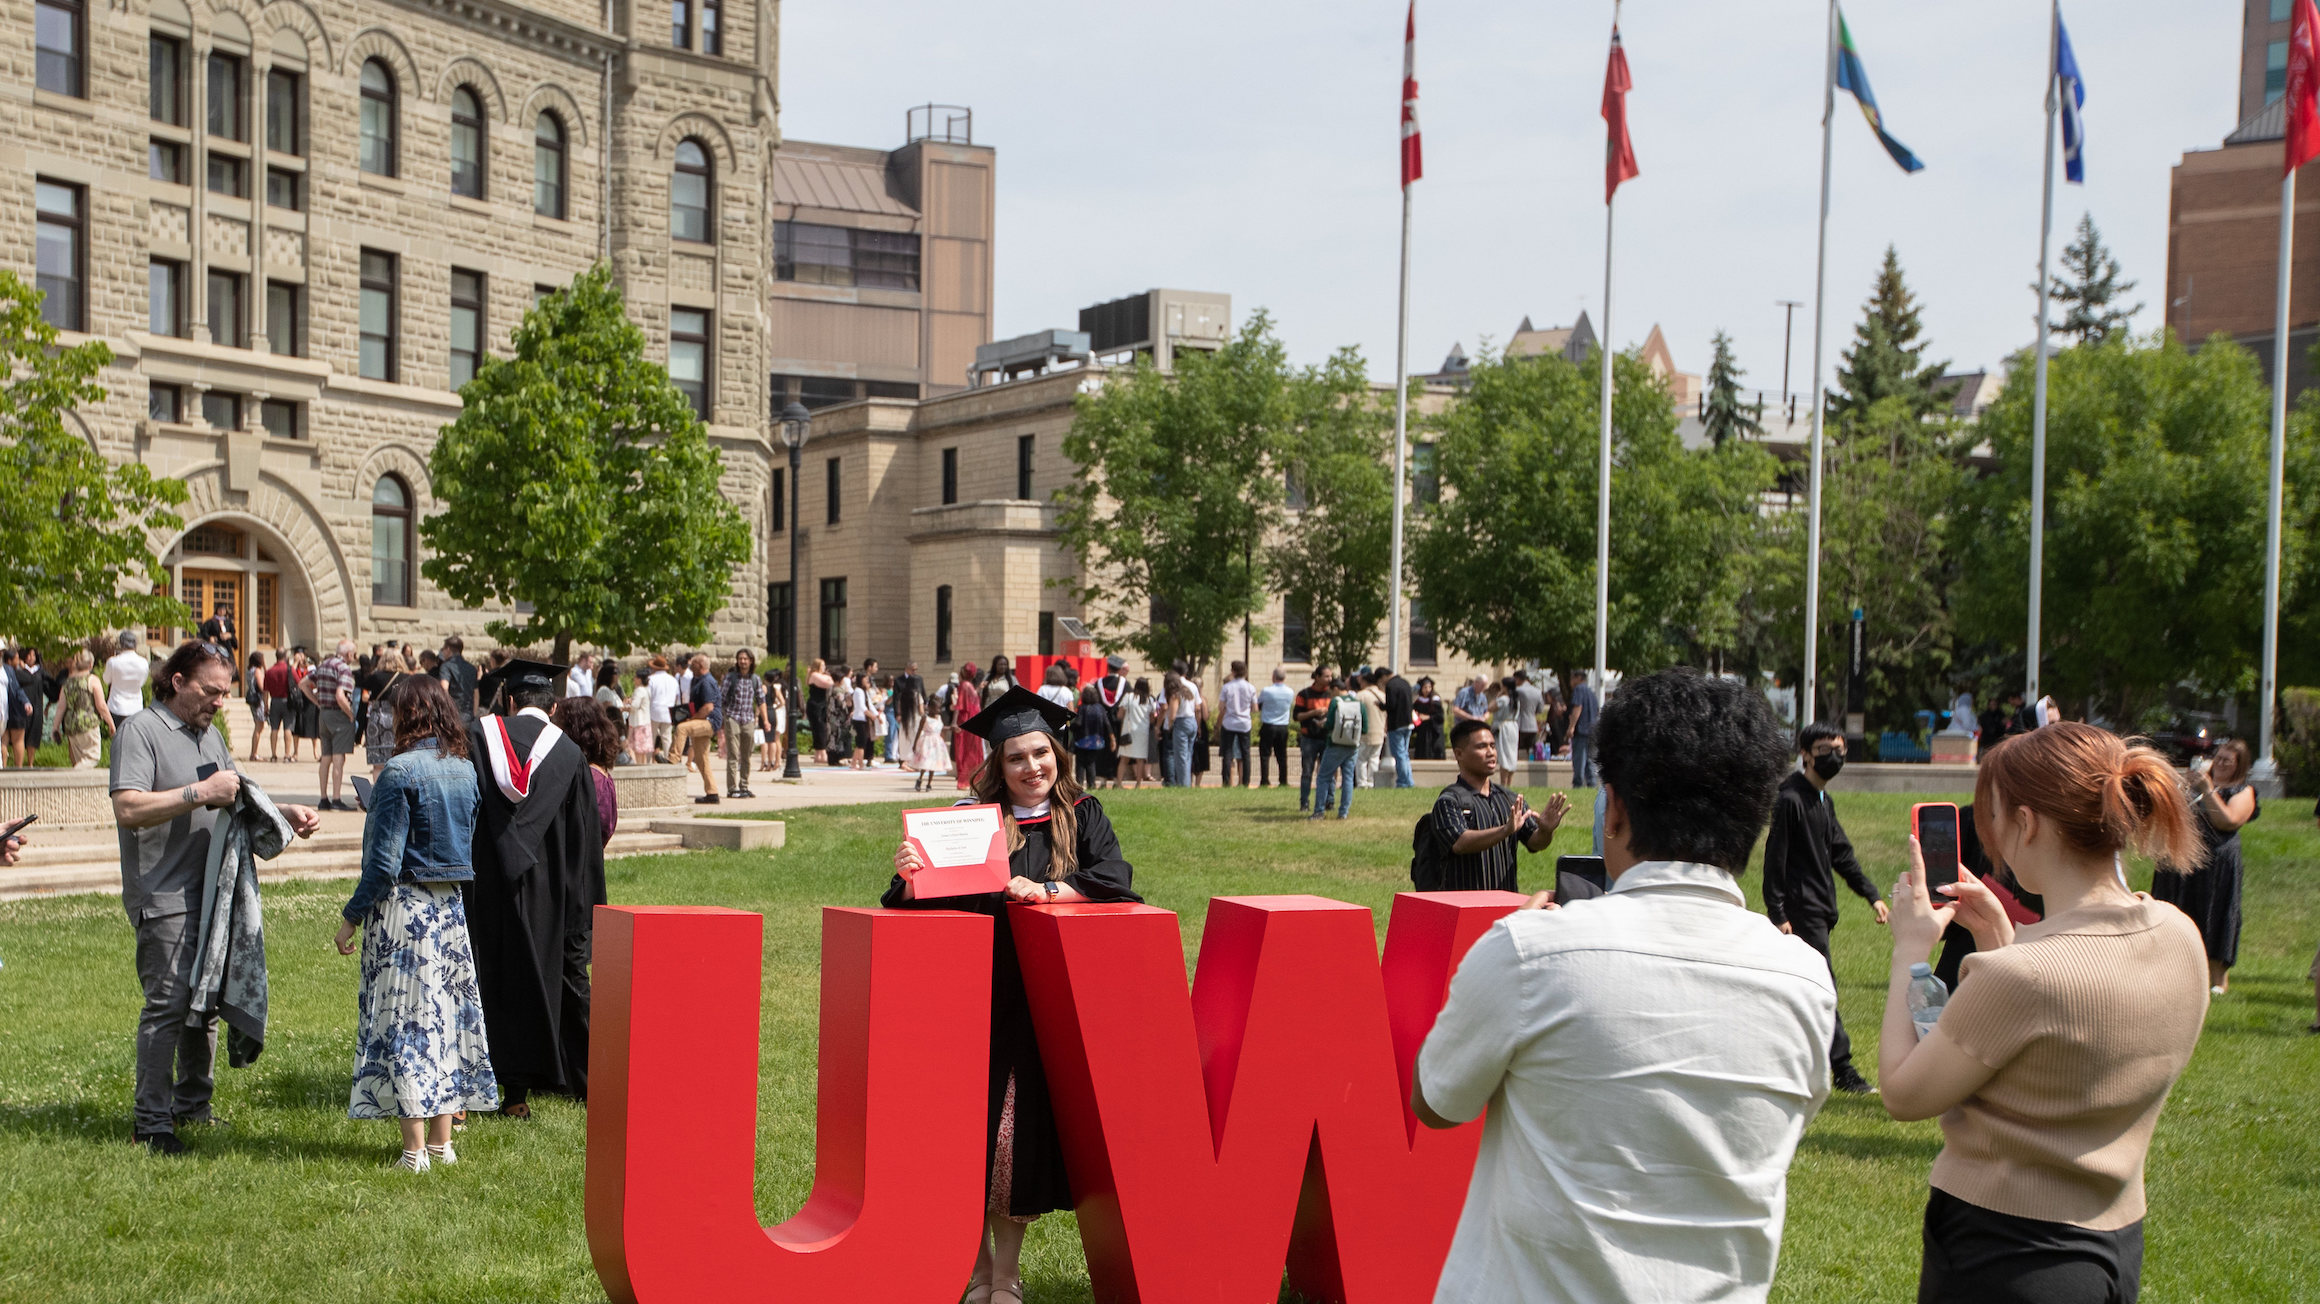 A graduate stands in front of the UW sign with Wesley Hall in the background.